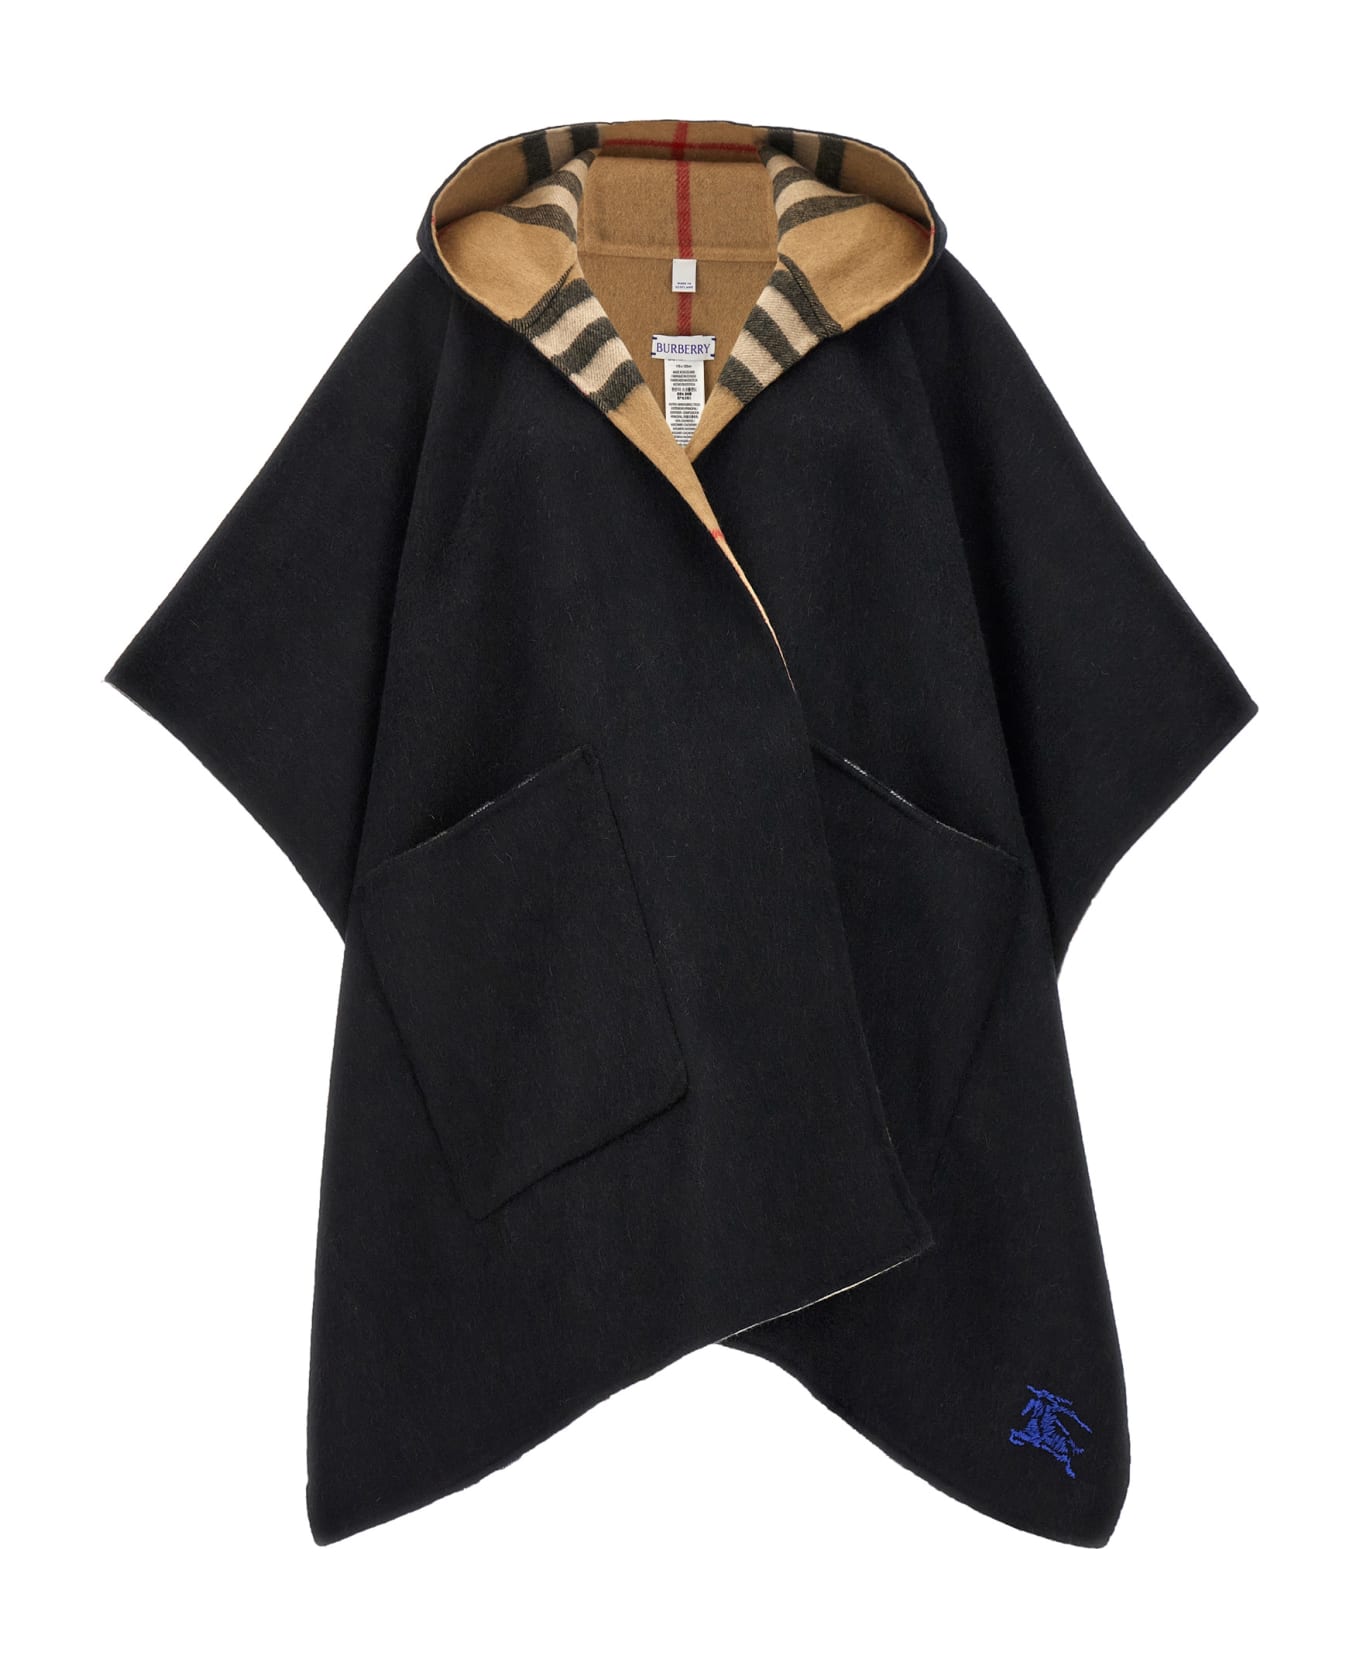 Burberry Reversible Hooded Cape - Multicolor